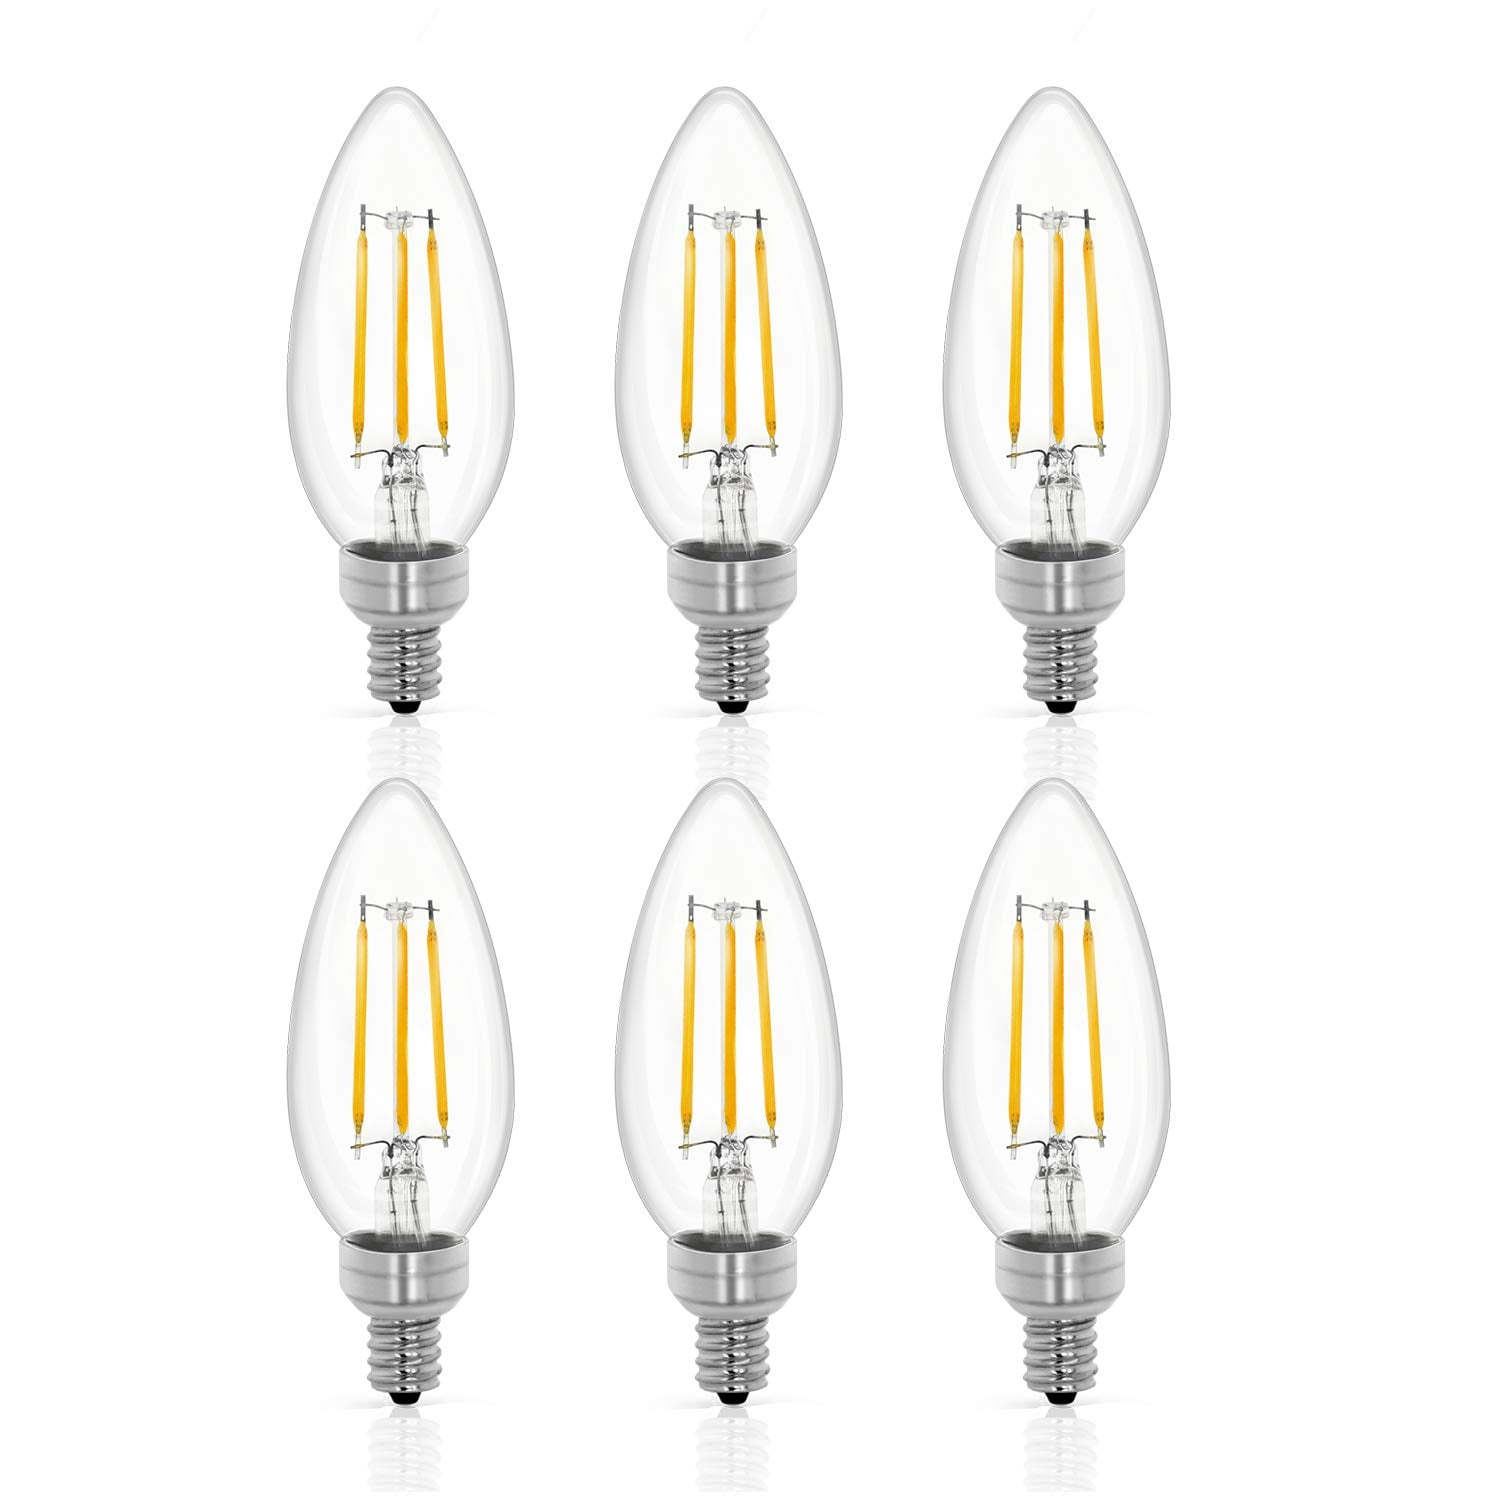 LVWIT B11 Filament Bulb E26 Base Non-Dimmable 6W 2700K Warm White Chandelier Decorative Candle Light Bulb 6 Pack 60W Equivalent